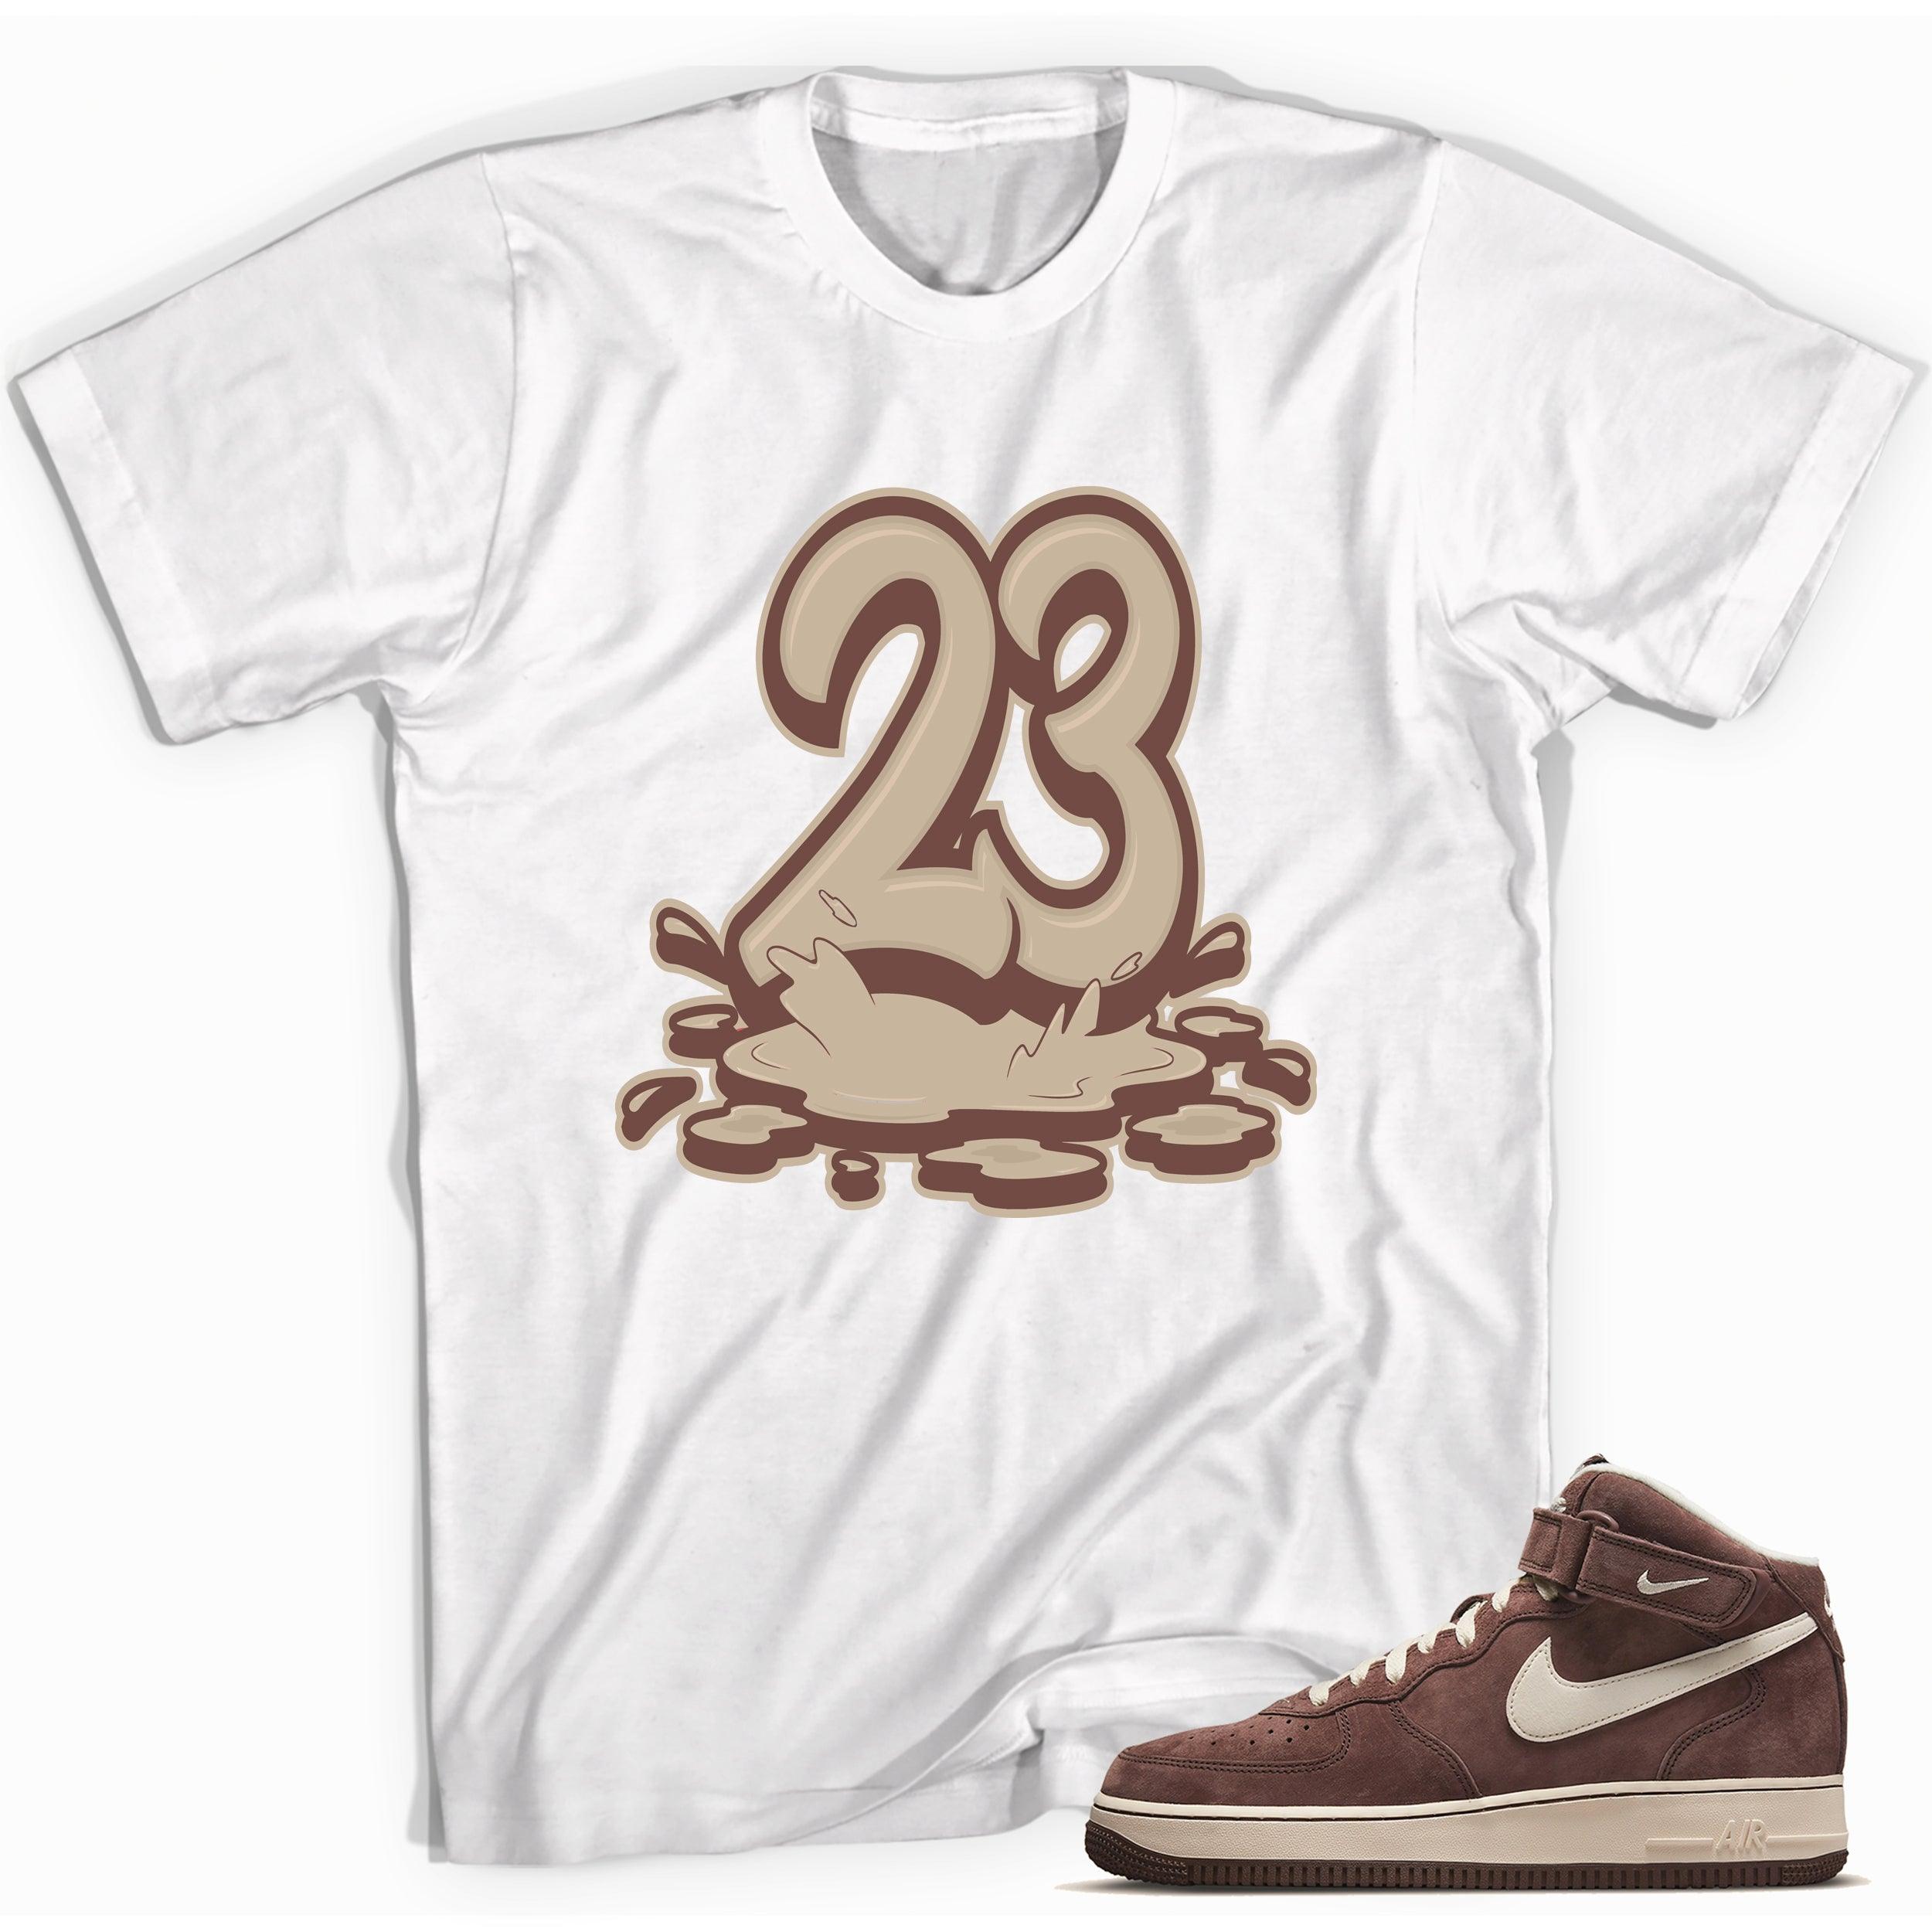 Number 3 Melting Shirt Nike Air Force 1 Mid QS Chocolate photo